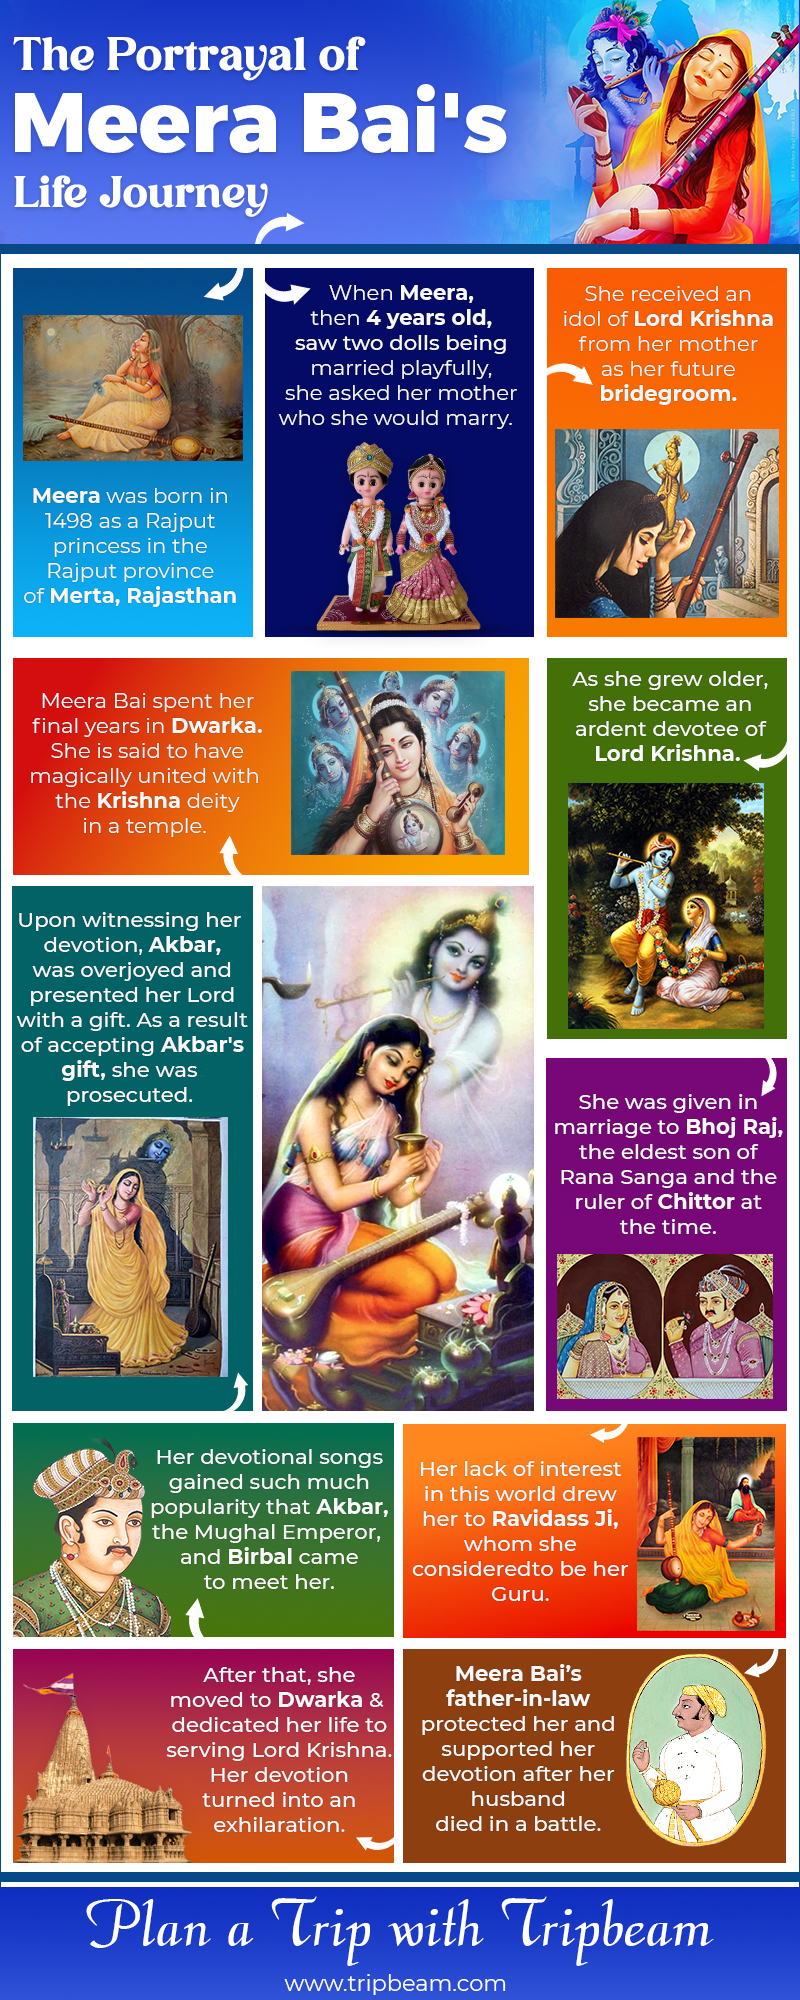 Infographic on Meera Bai's Journey of Love and Devotion